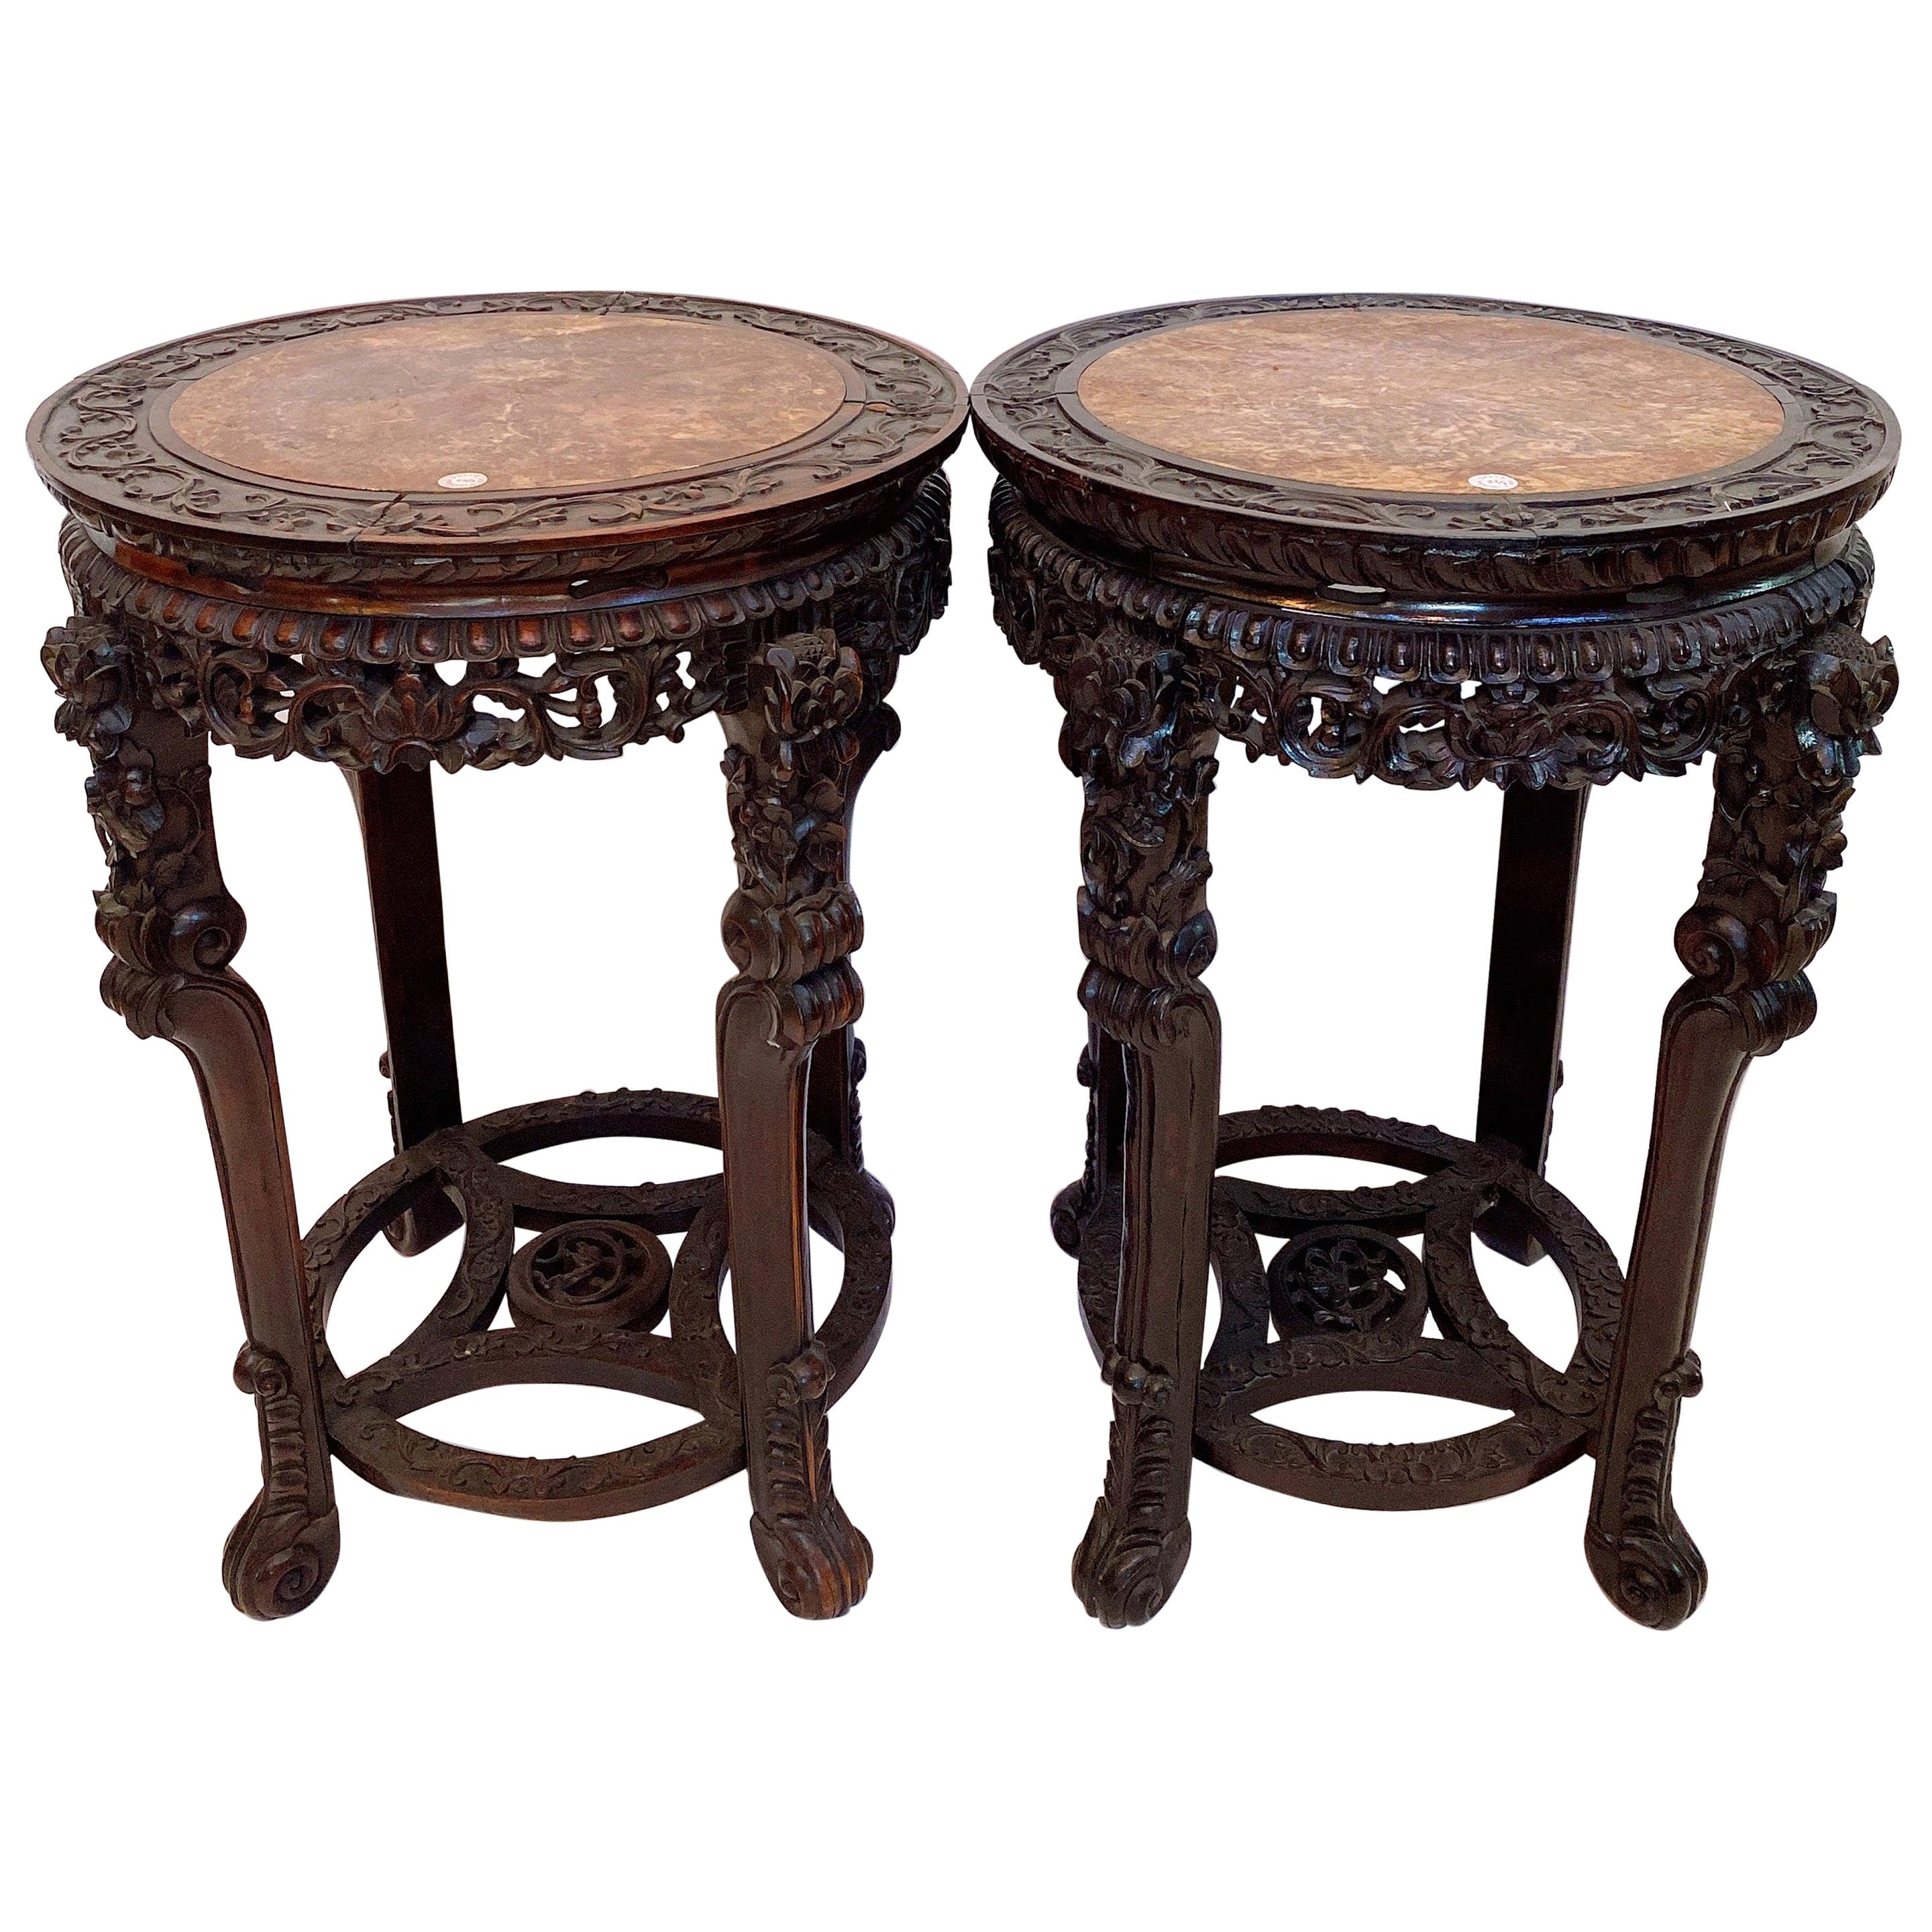 19th Century Pair of Chinese Carved Rosewood Flower Stands Marble-Top